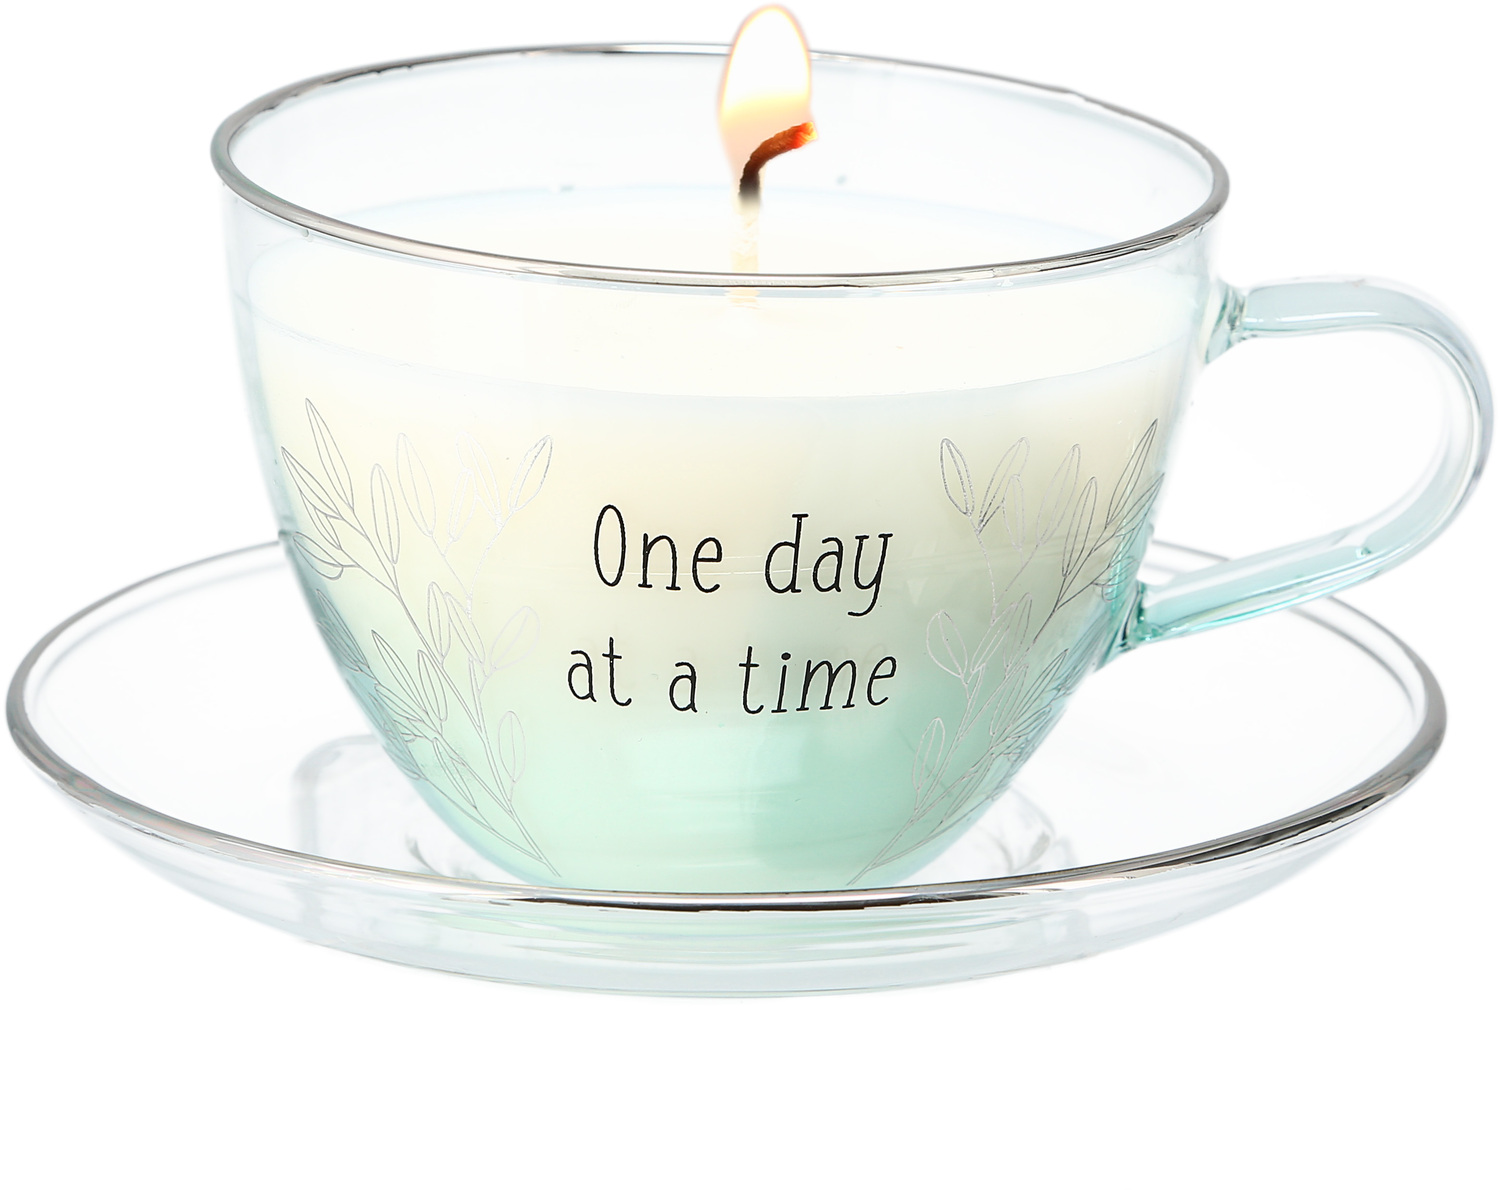 One Day by Faith Hope and Healing - One Day - 6 oz - 100% Soy Wax Tea Cup Candle with Saucer
Scent: Fresh Cotton